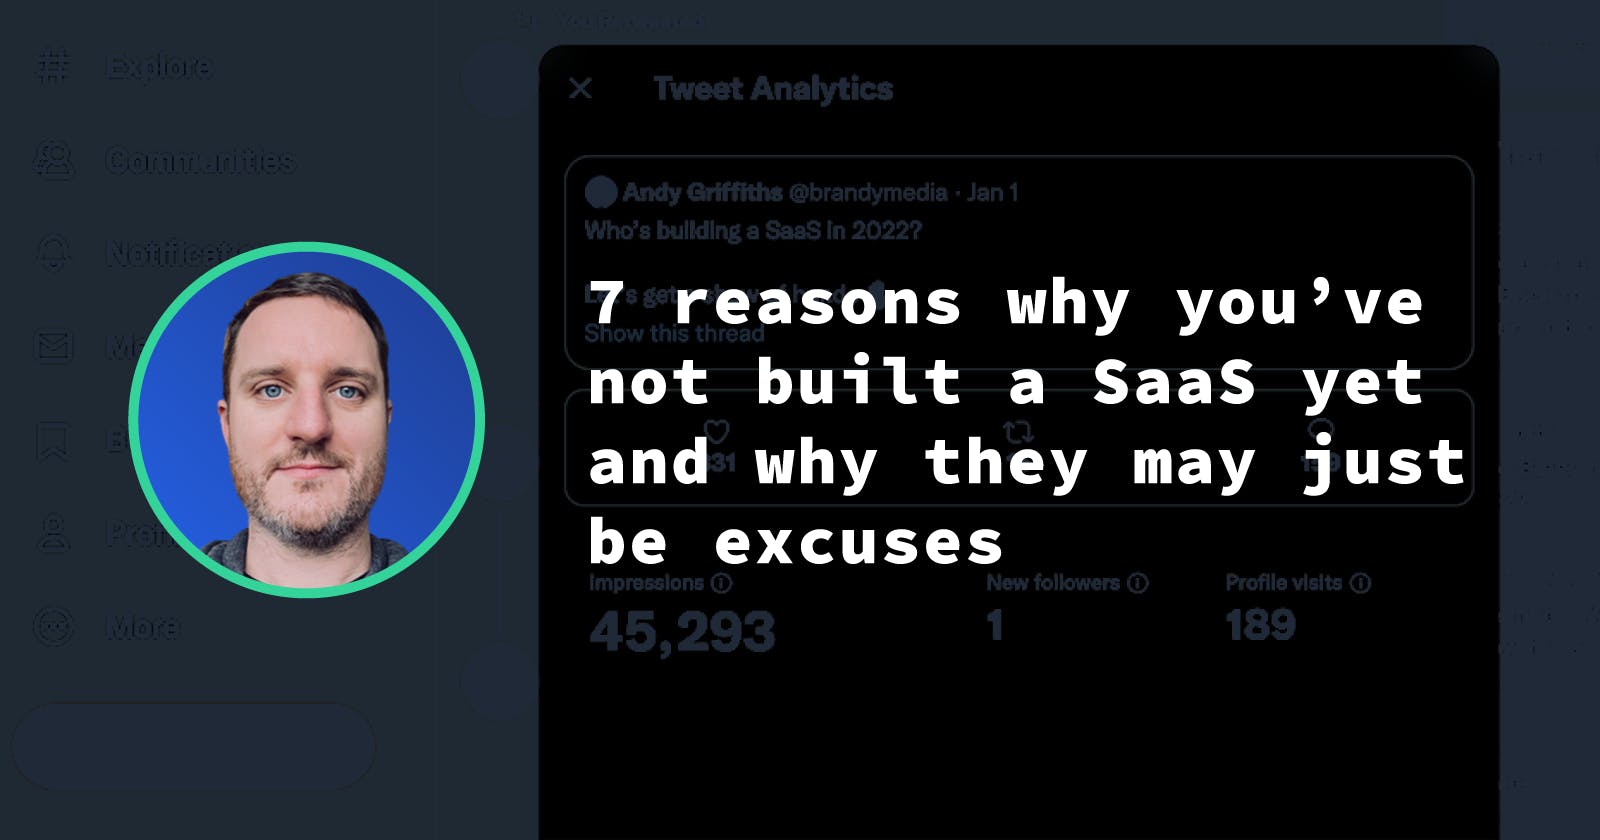 7 reasons why you’ve not built a SaaS yet and why they may just be excuses.